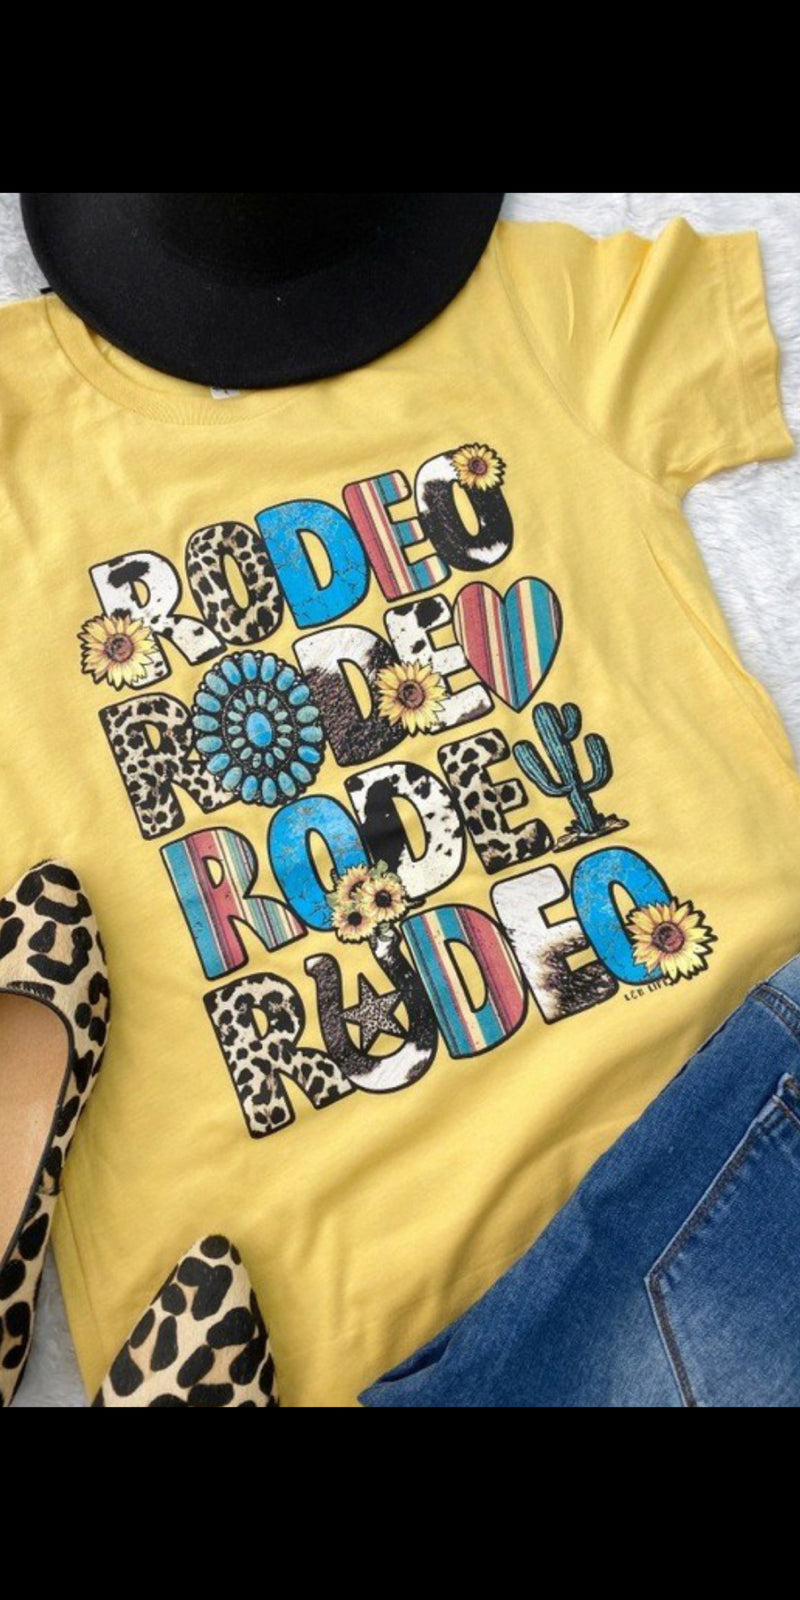 Rodeo x4 on Yellow Tee - Also in Plus Size